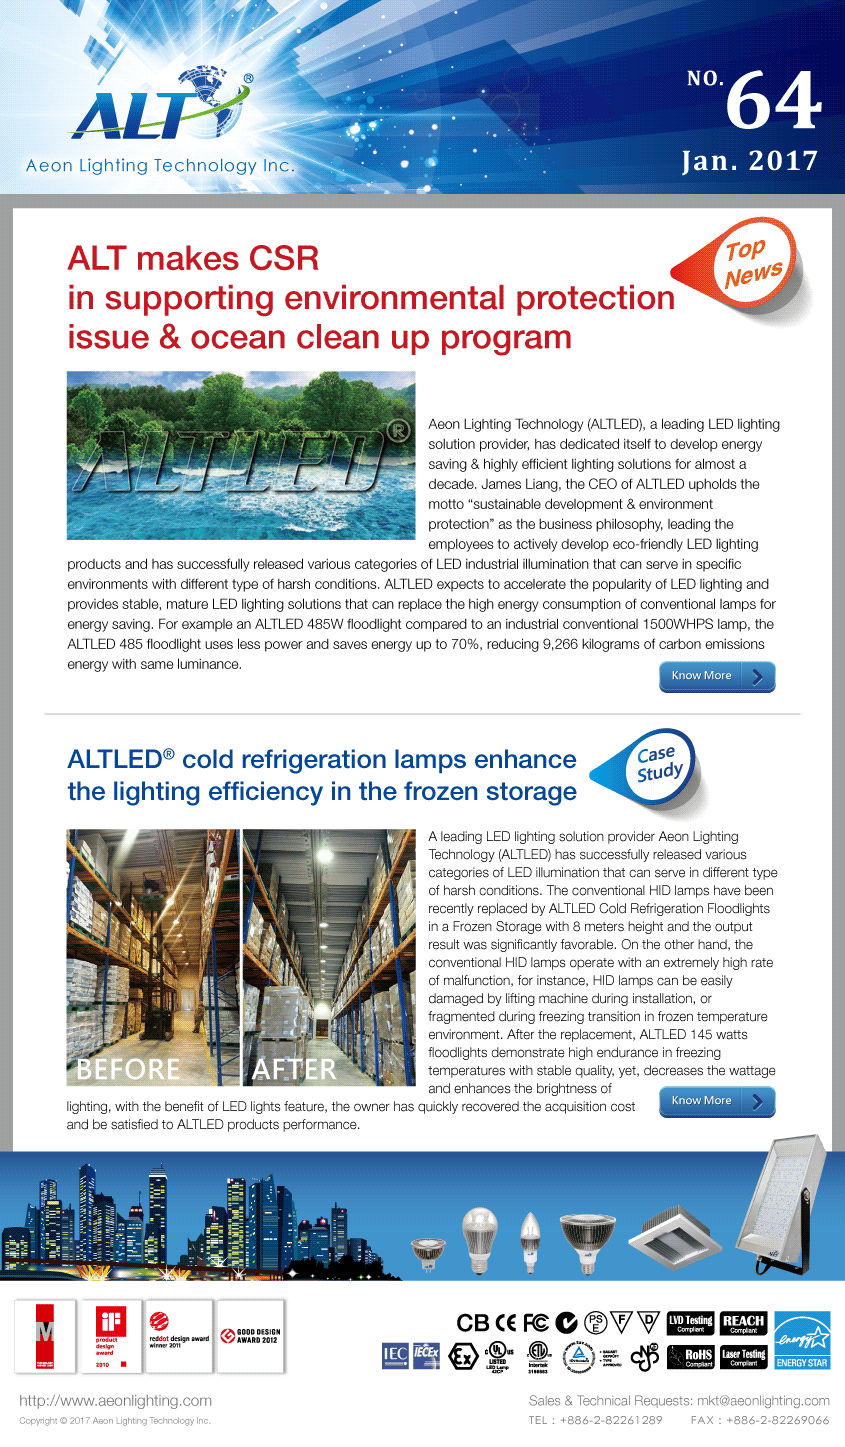 Aeon lighting Technology makes CSR in supporting environmental protection issue & ocean clean up program